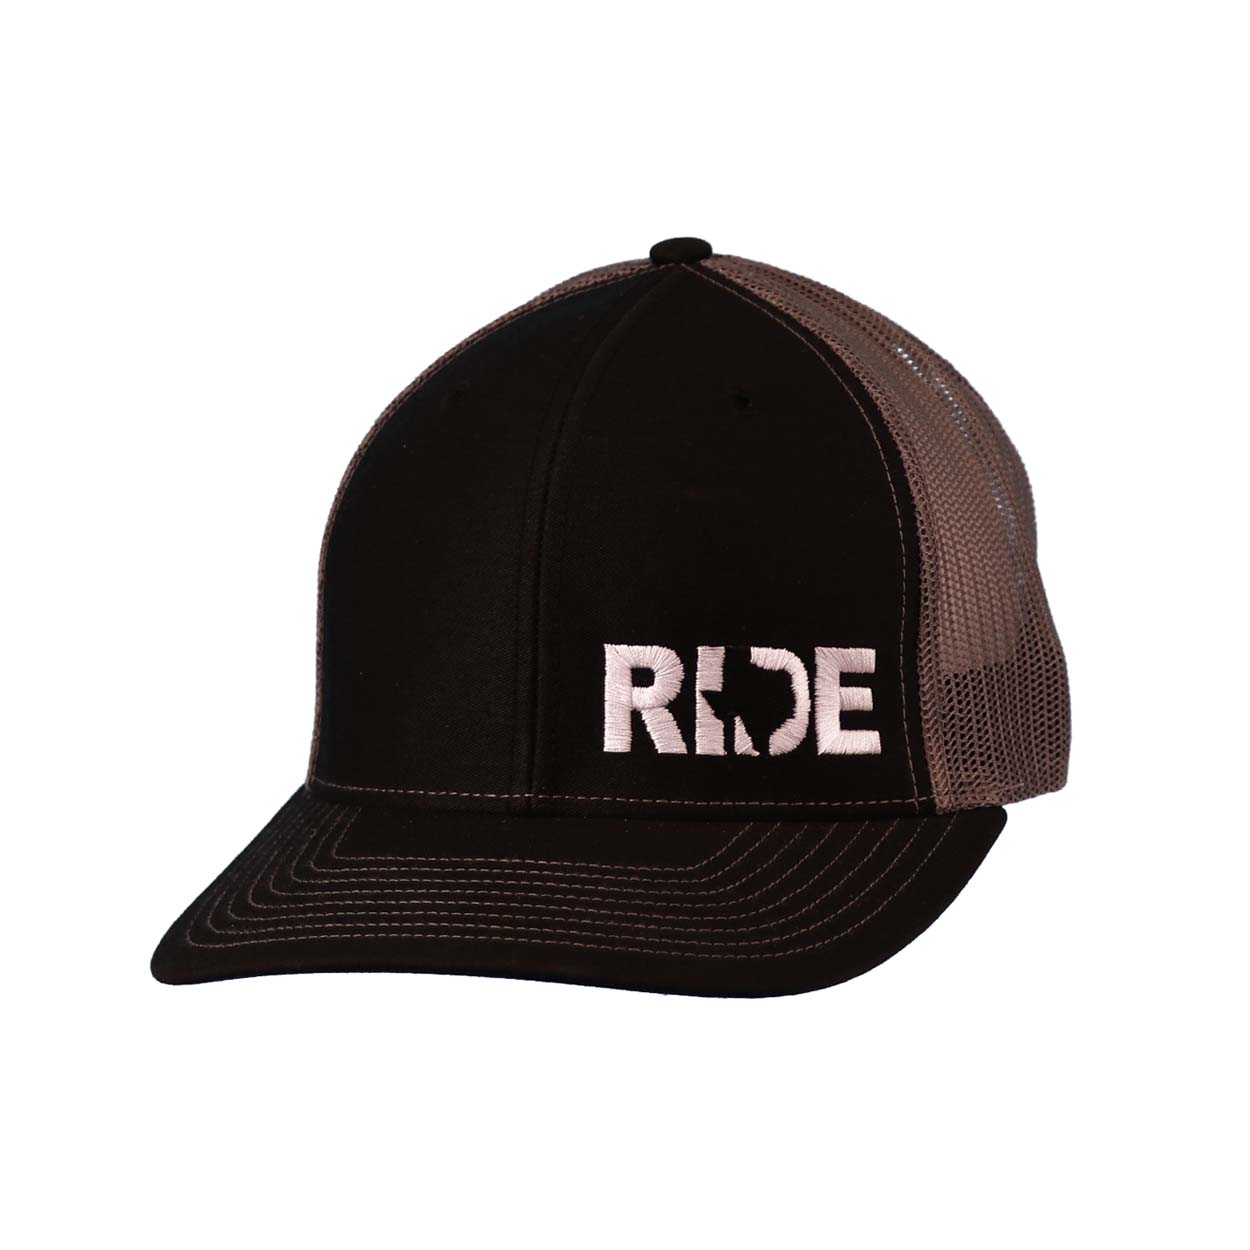 Ride Texas Night Out Embroidered Snapback Trucker Hat Black/Gray